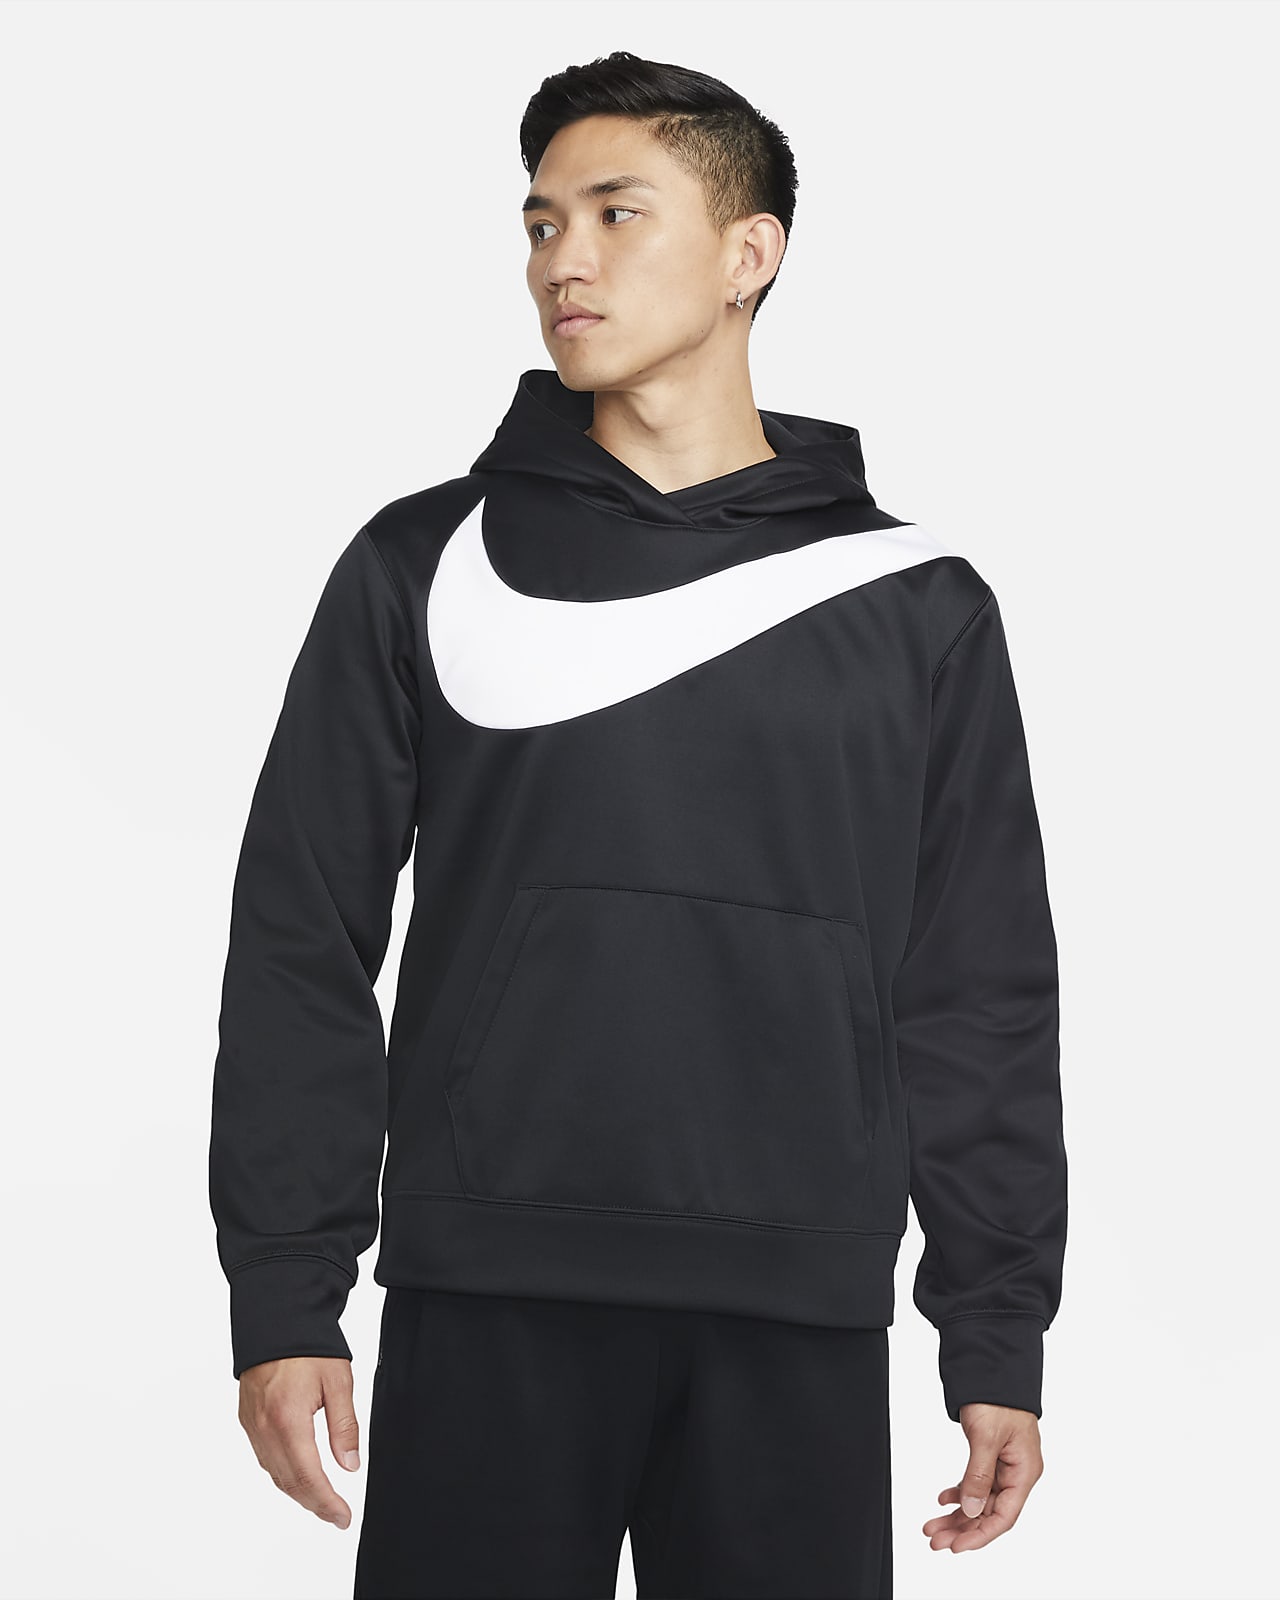 Nike Therma HBR Pullover $39.97 Free Shipping - Sneaker Steal